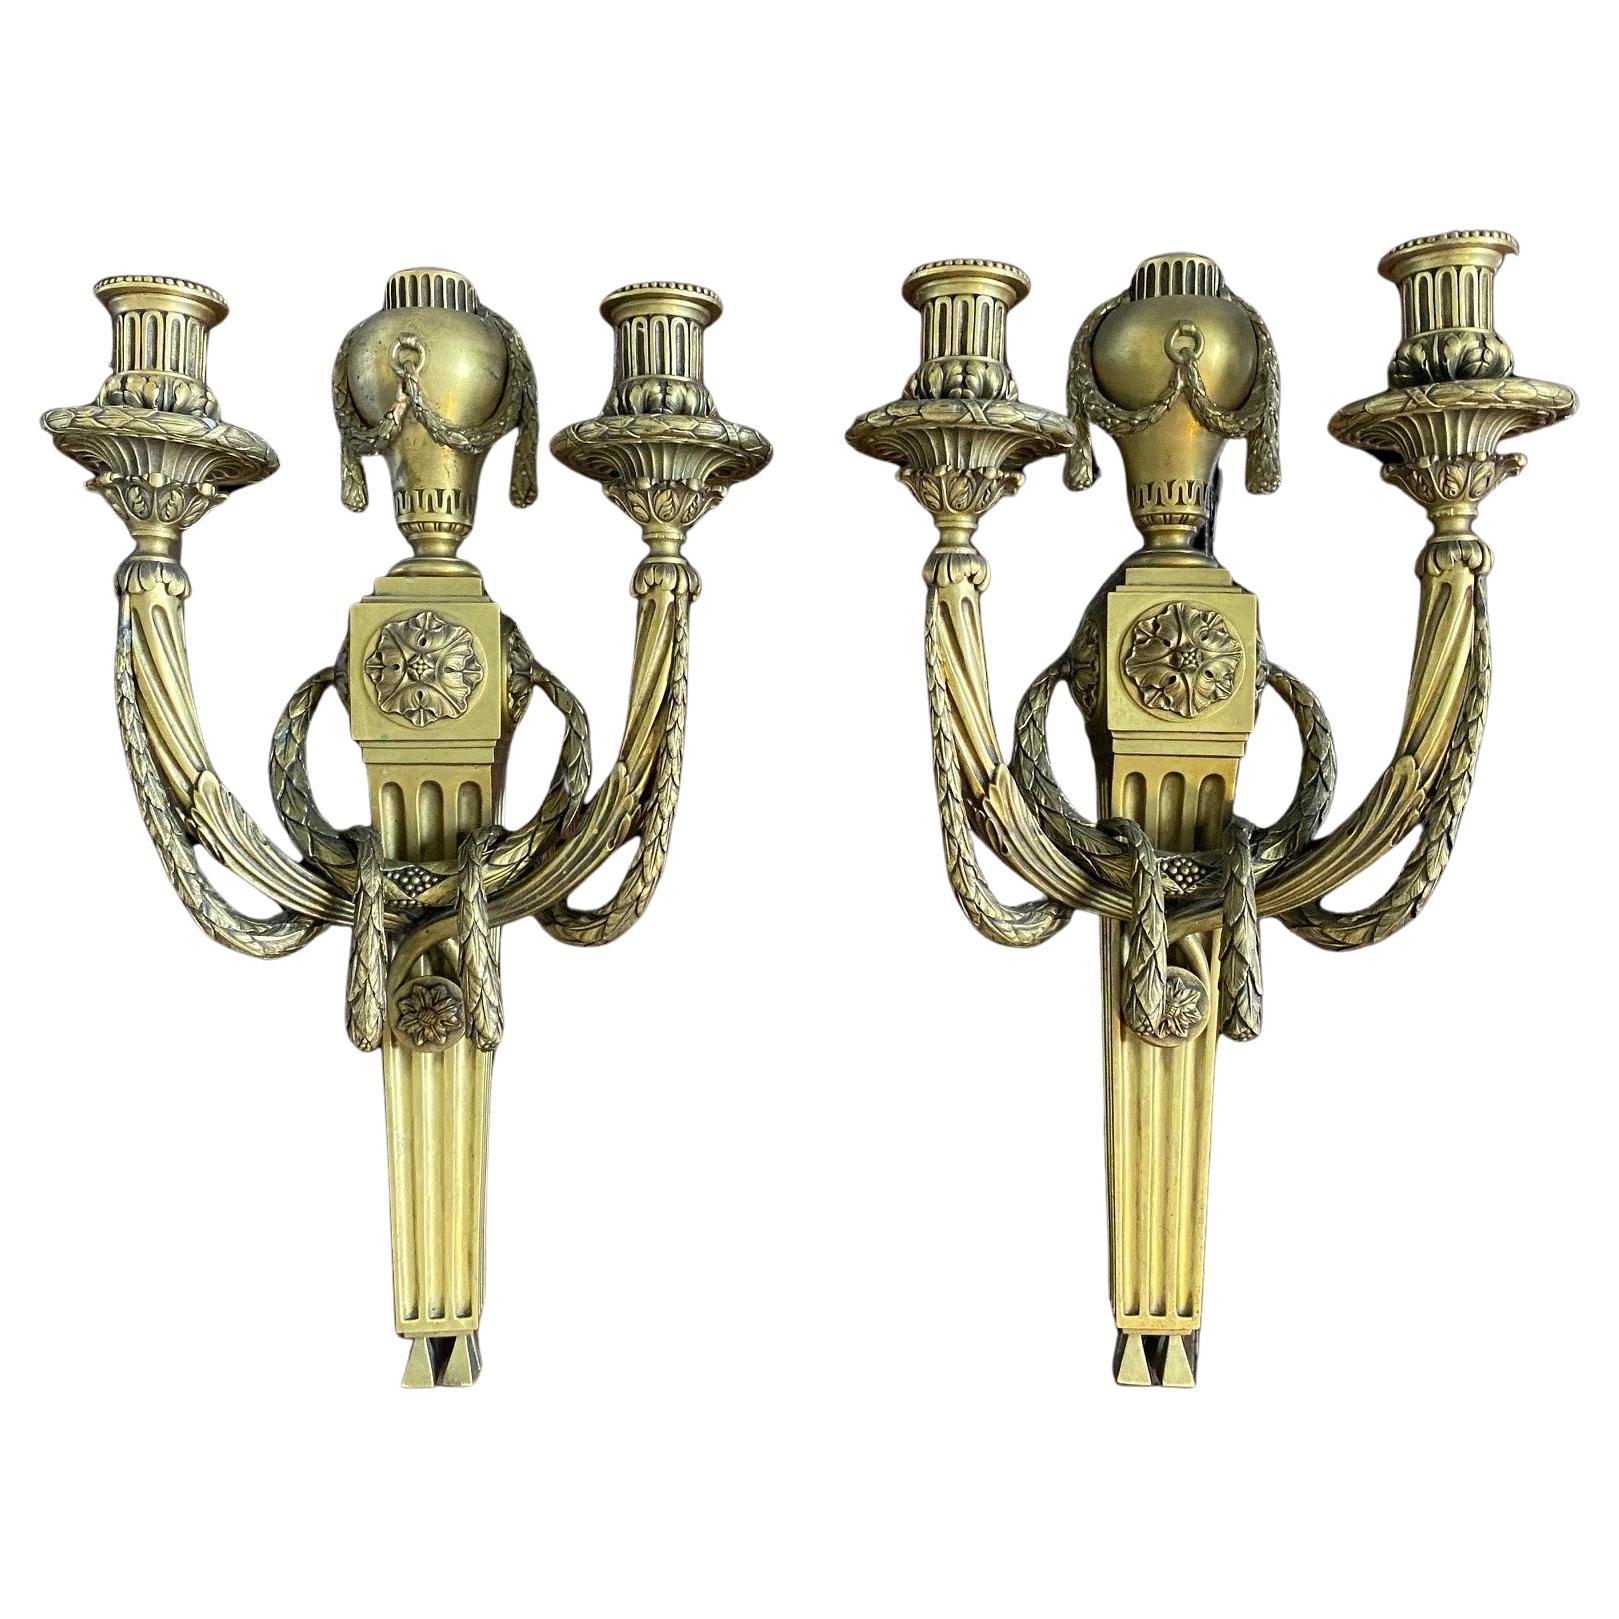 Pair of Caldwell Louis XVI Style Gilt Bronze Wall
Lights For Sale